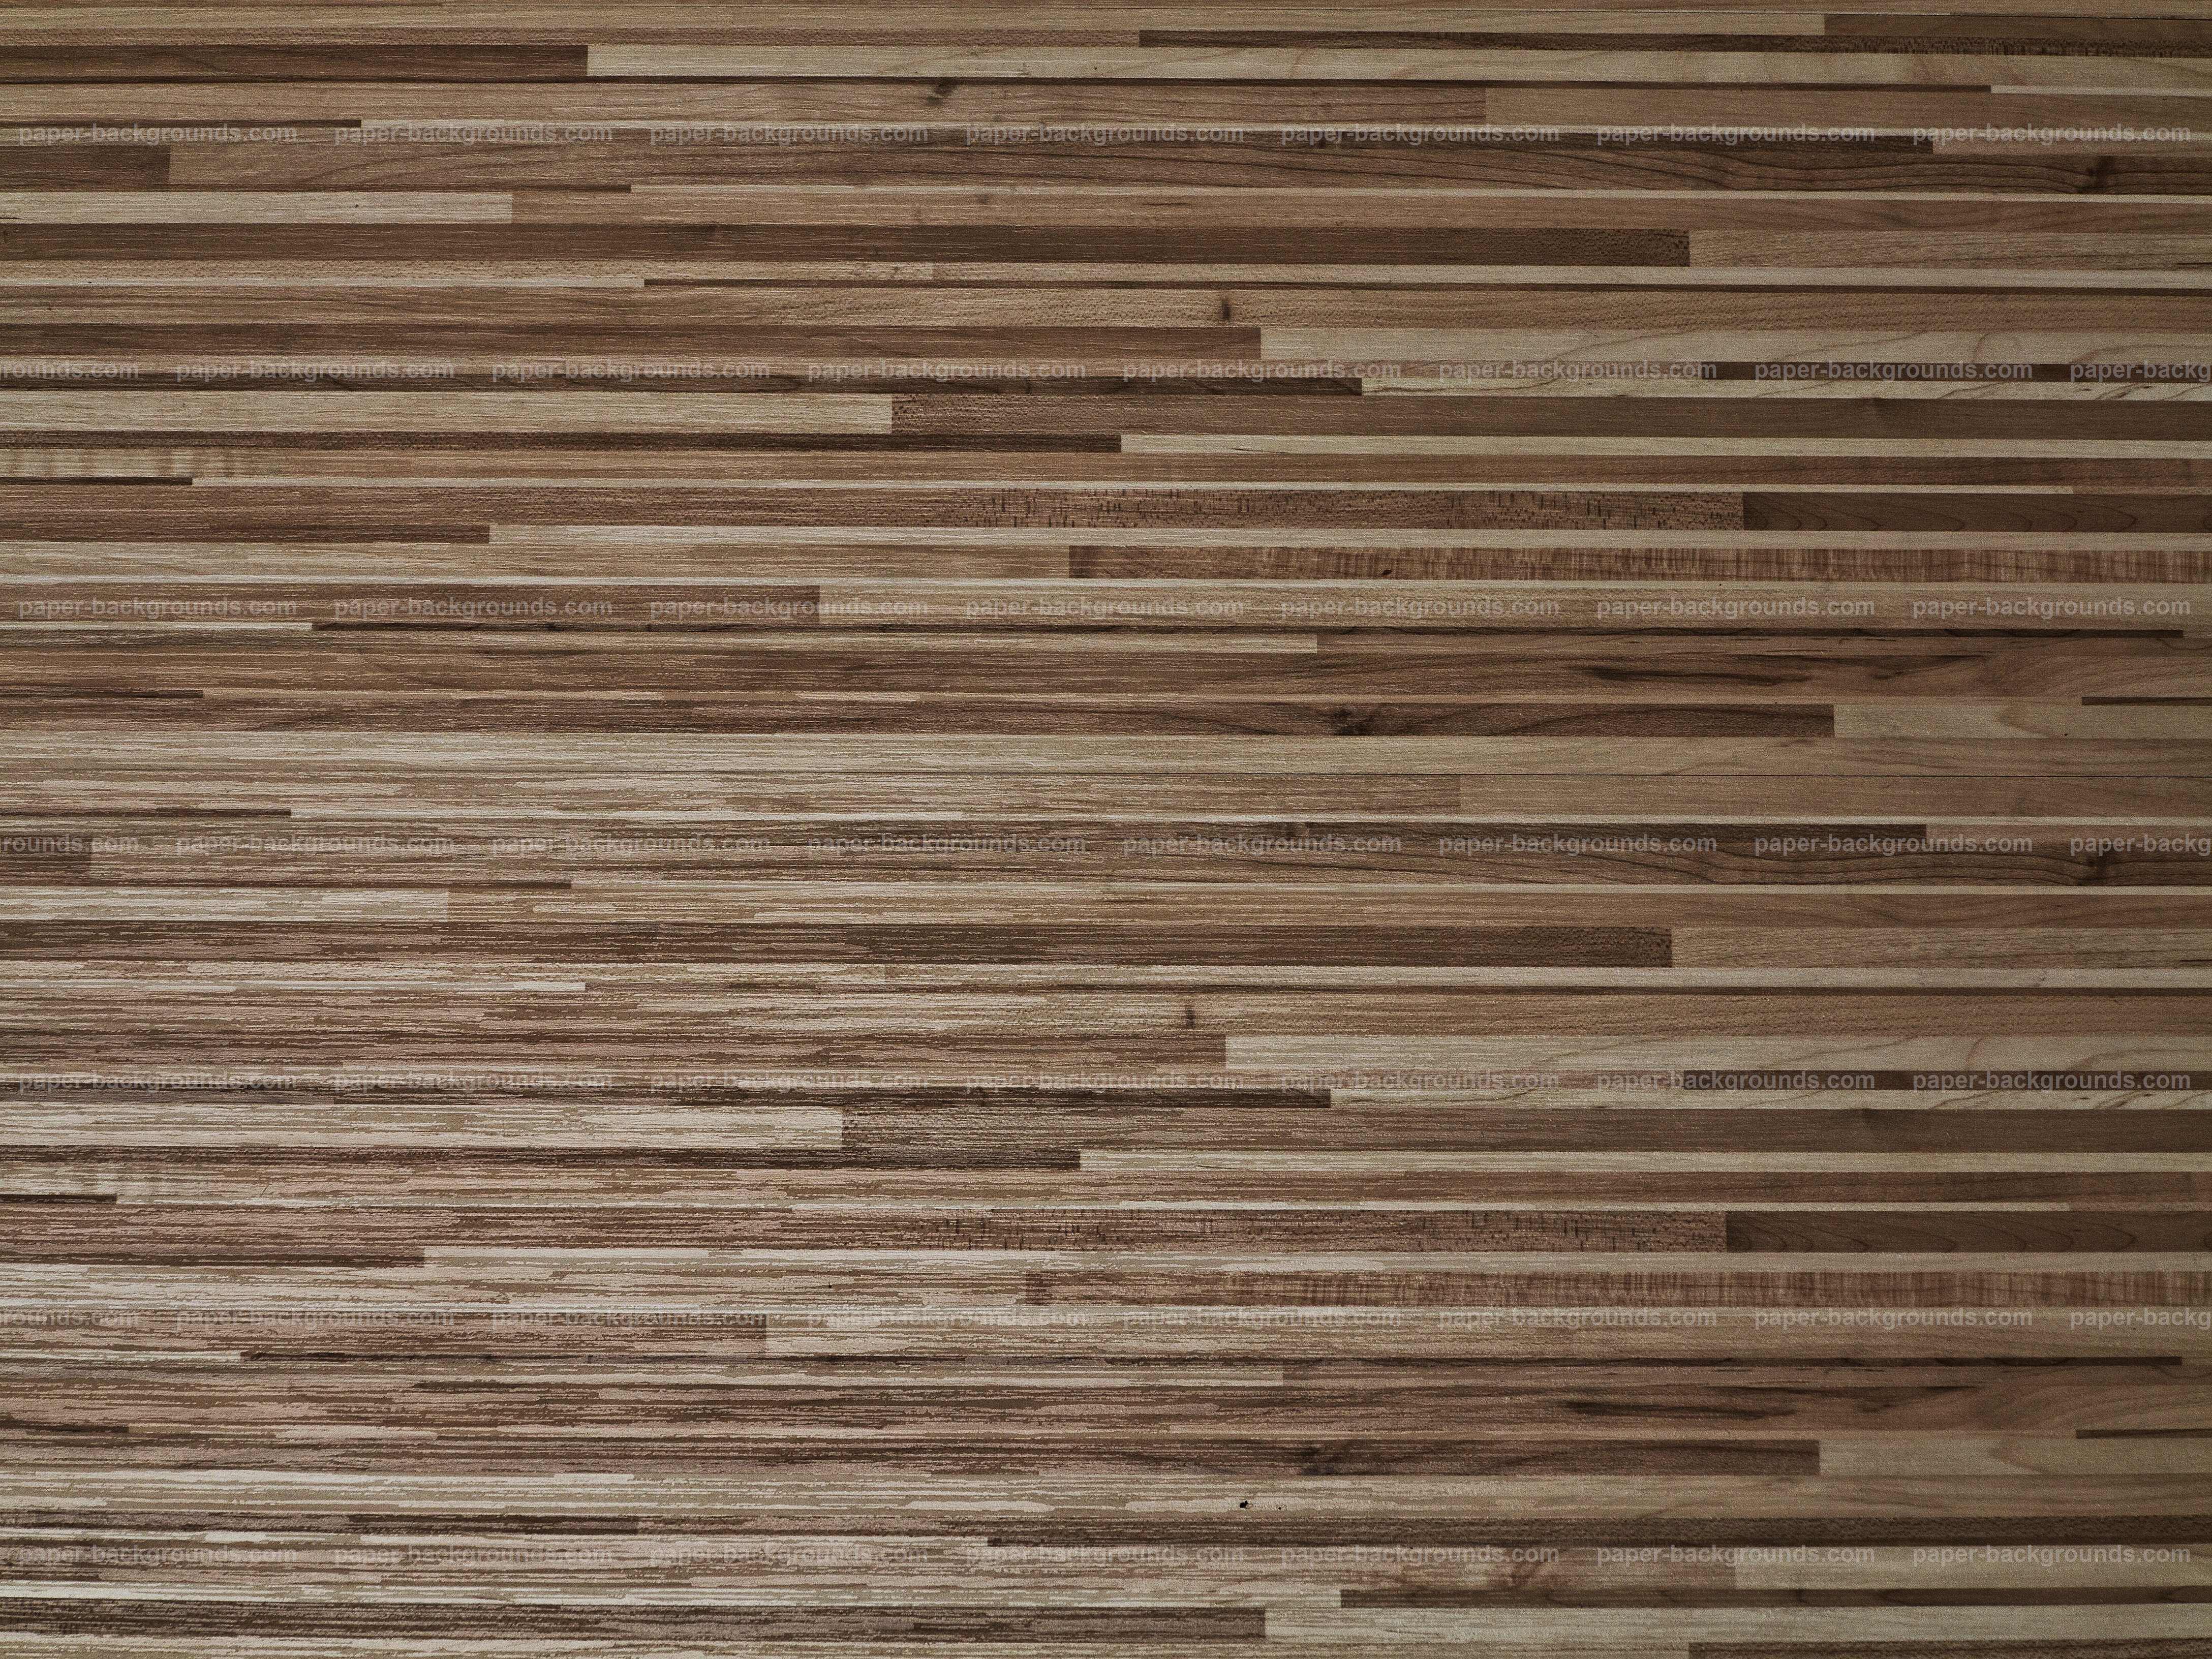 Paper Backgrounds | Wood Floor Pattern Background